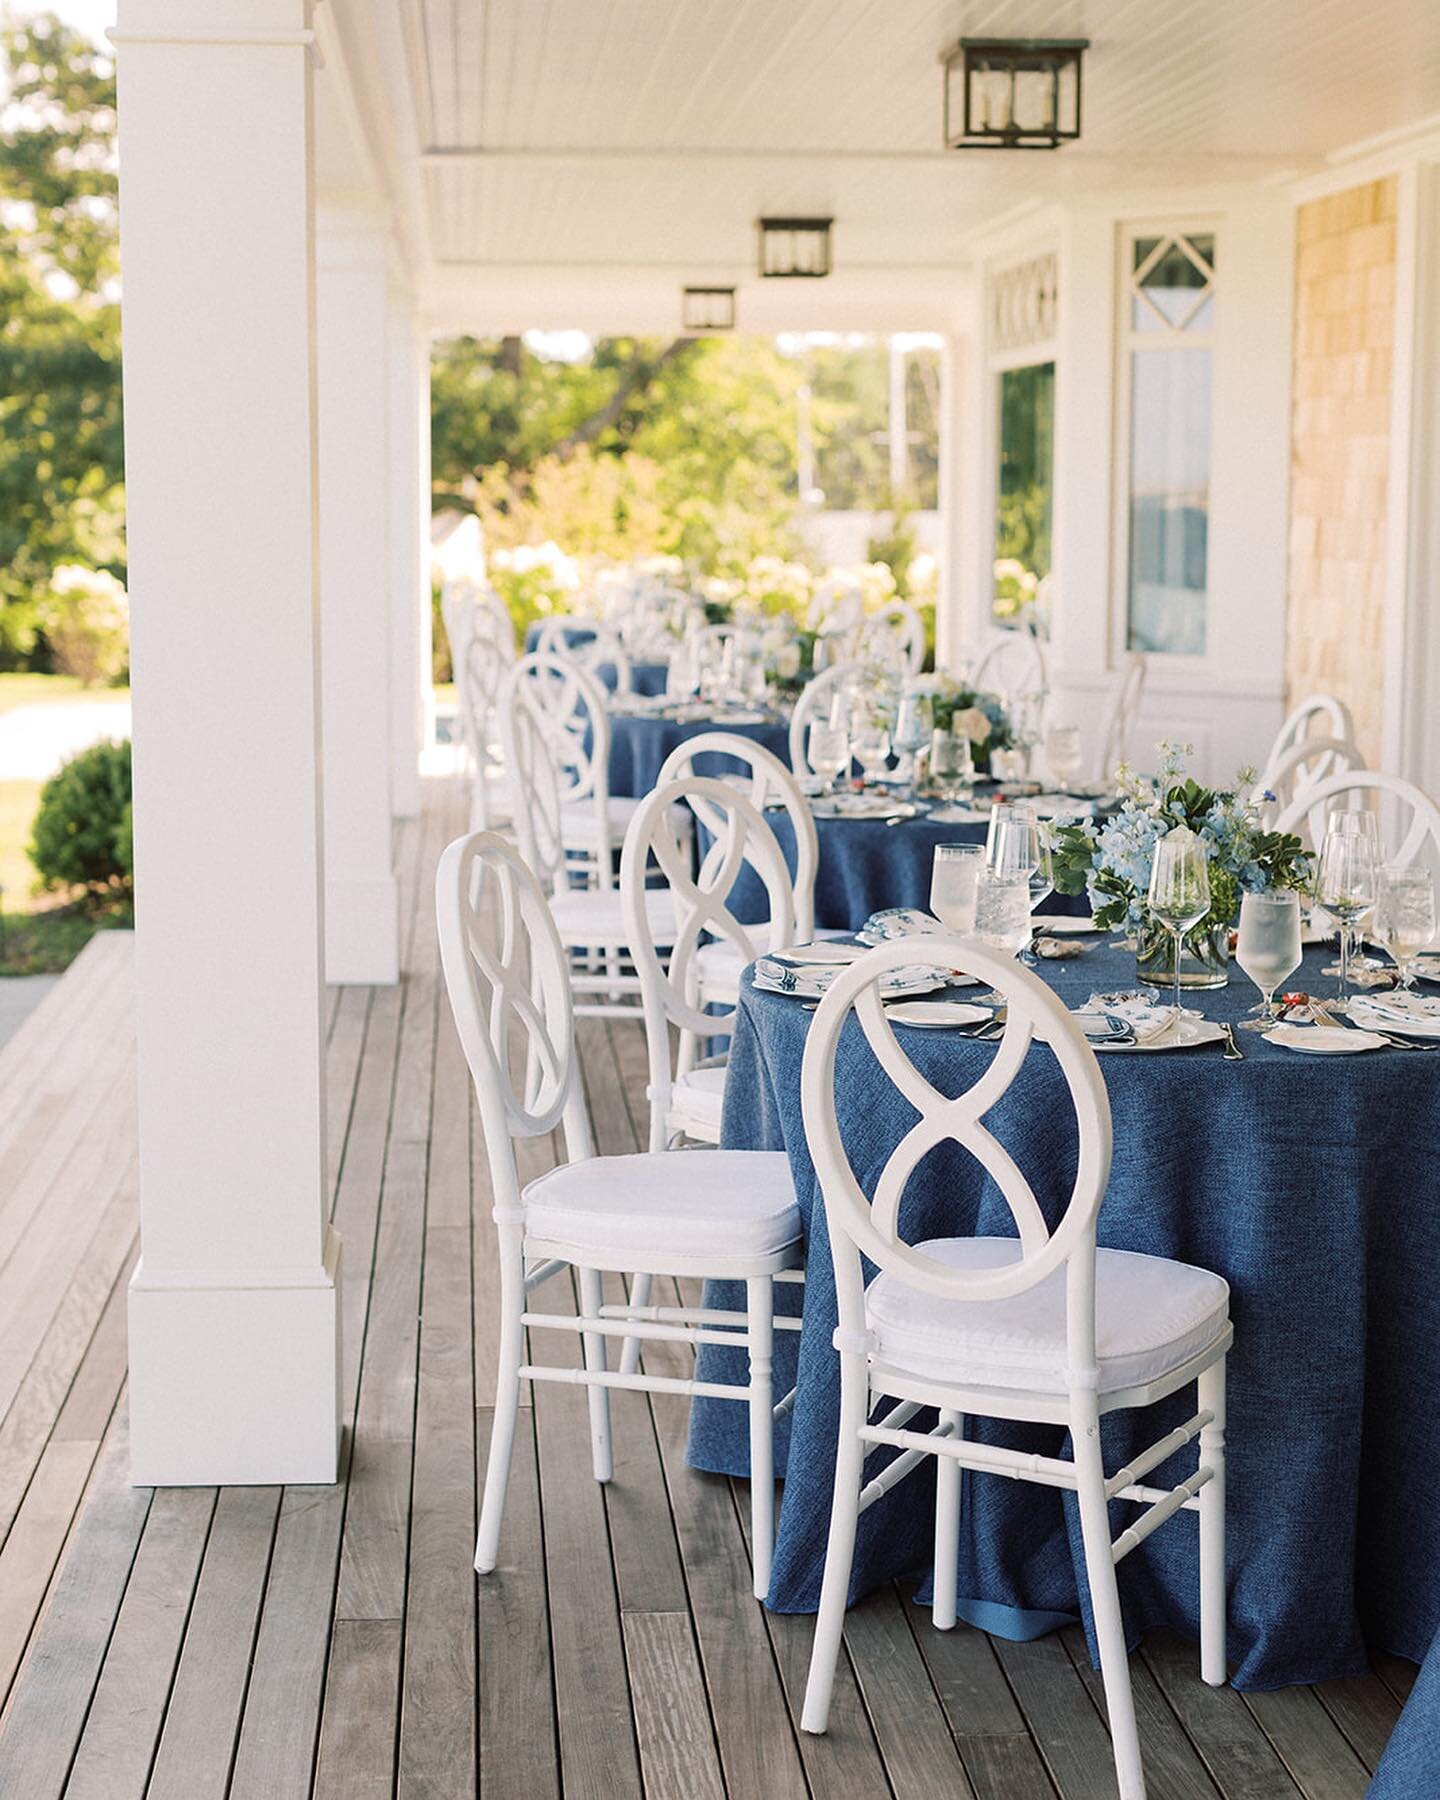 A perfect little coastal rehearsal dinner. ✨ Rob + Alison kicked off their wedding weekend with some al fresco dining at the most breathtaking estate. I loved the patterns of blues we brought together create this breezy seaside celebration. And to to